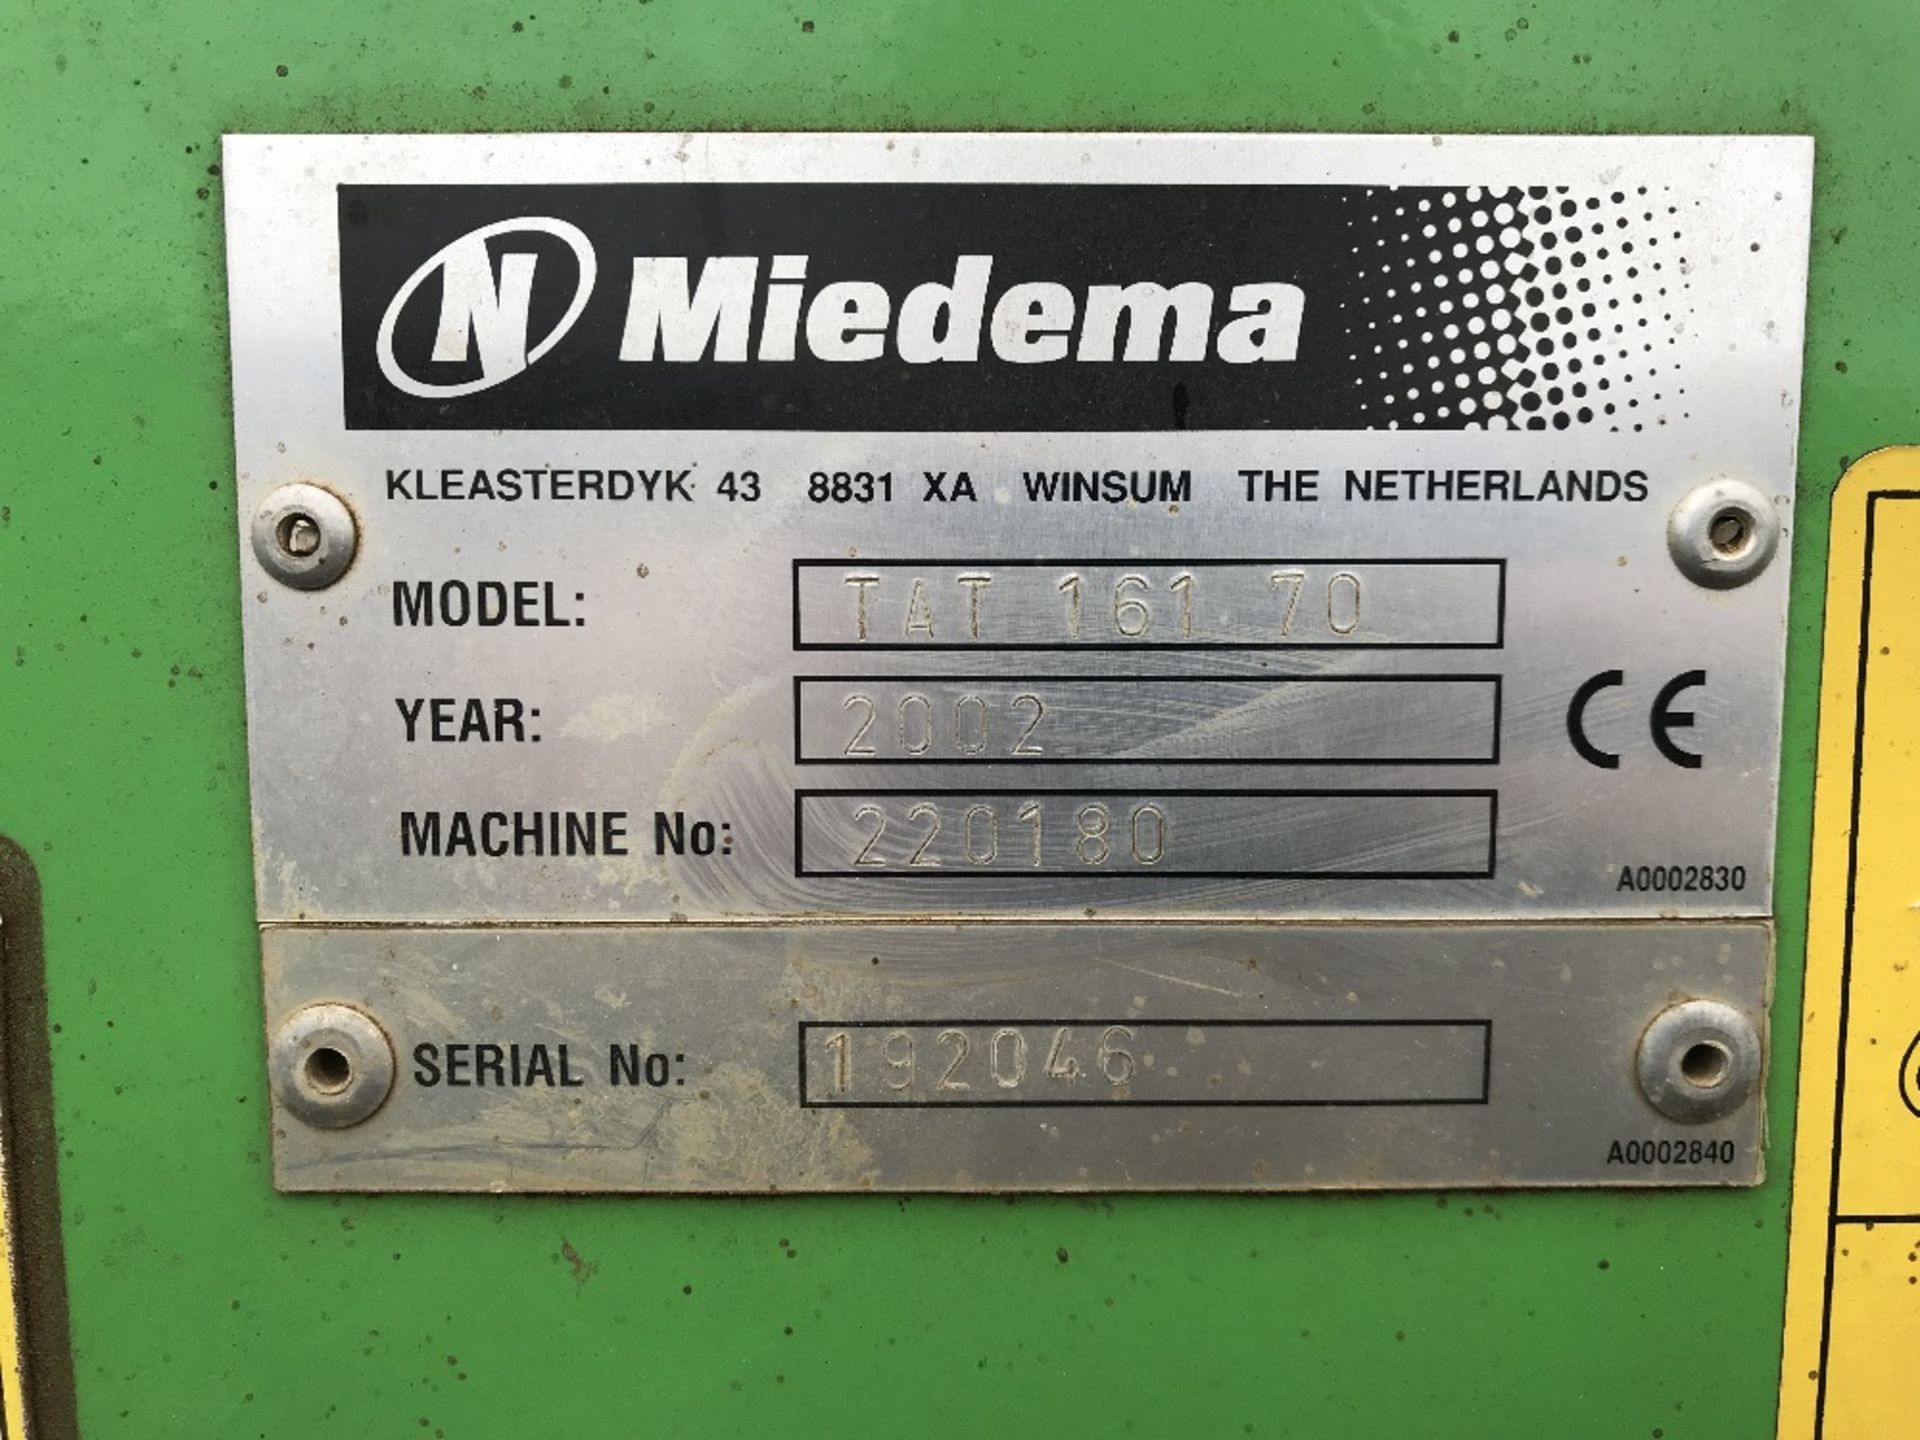 2002 Miedema 3 phase piggy back conveyor, Model TAT1670, Serial number 192046,